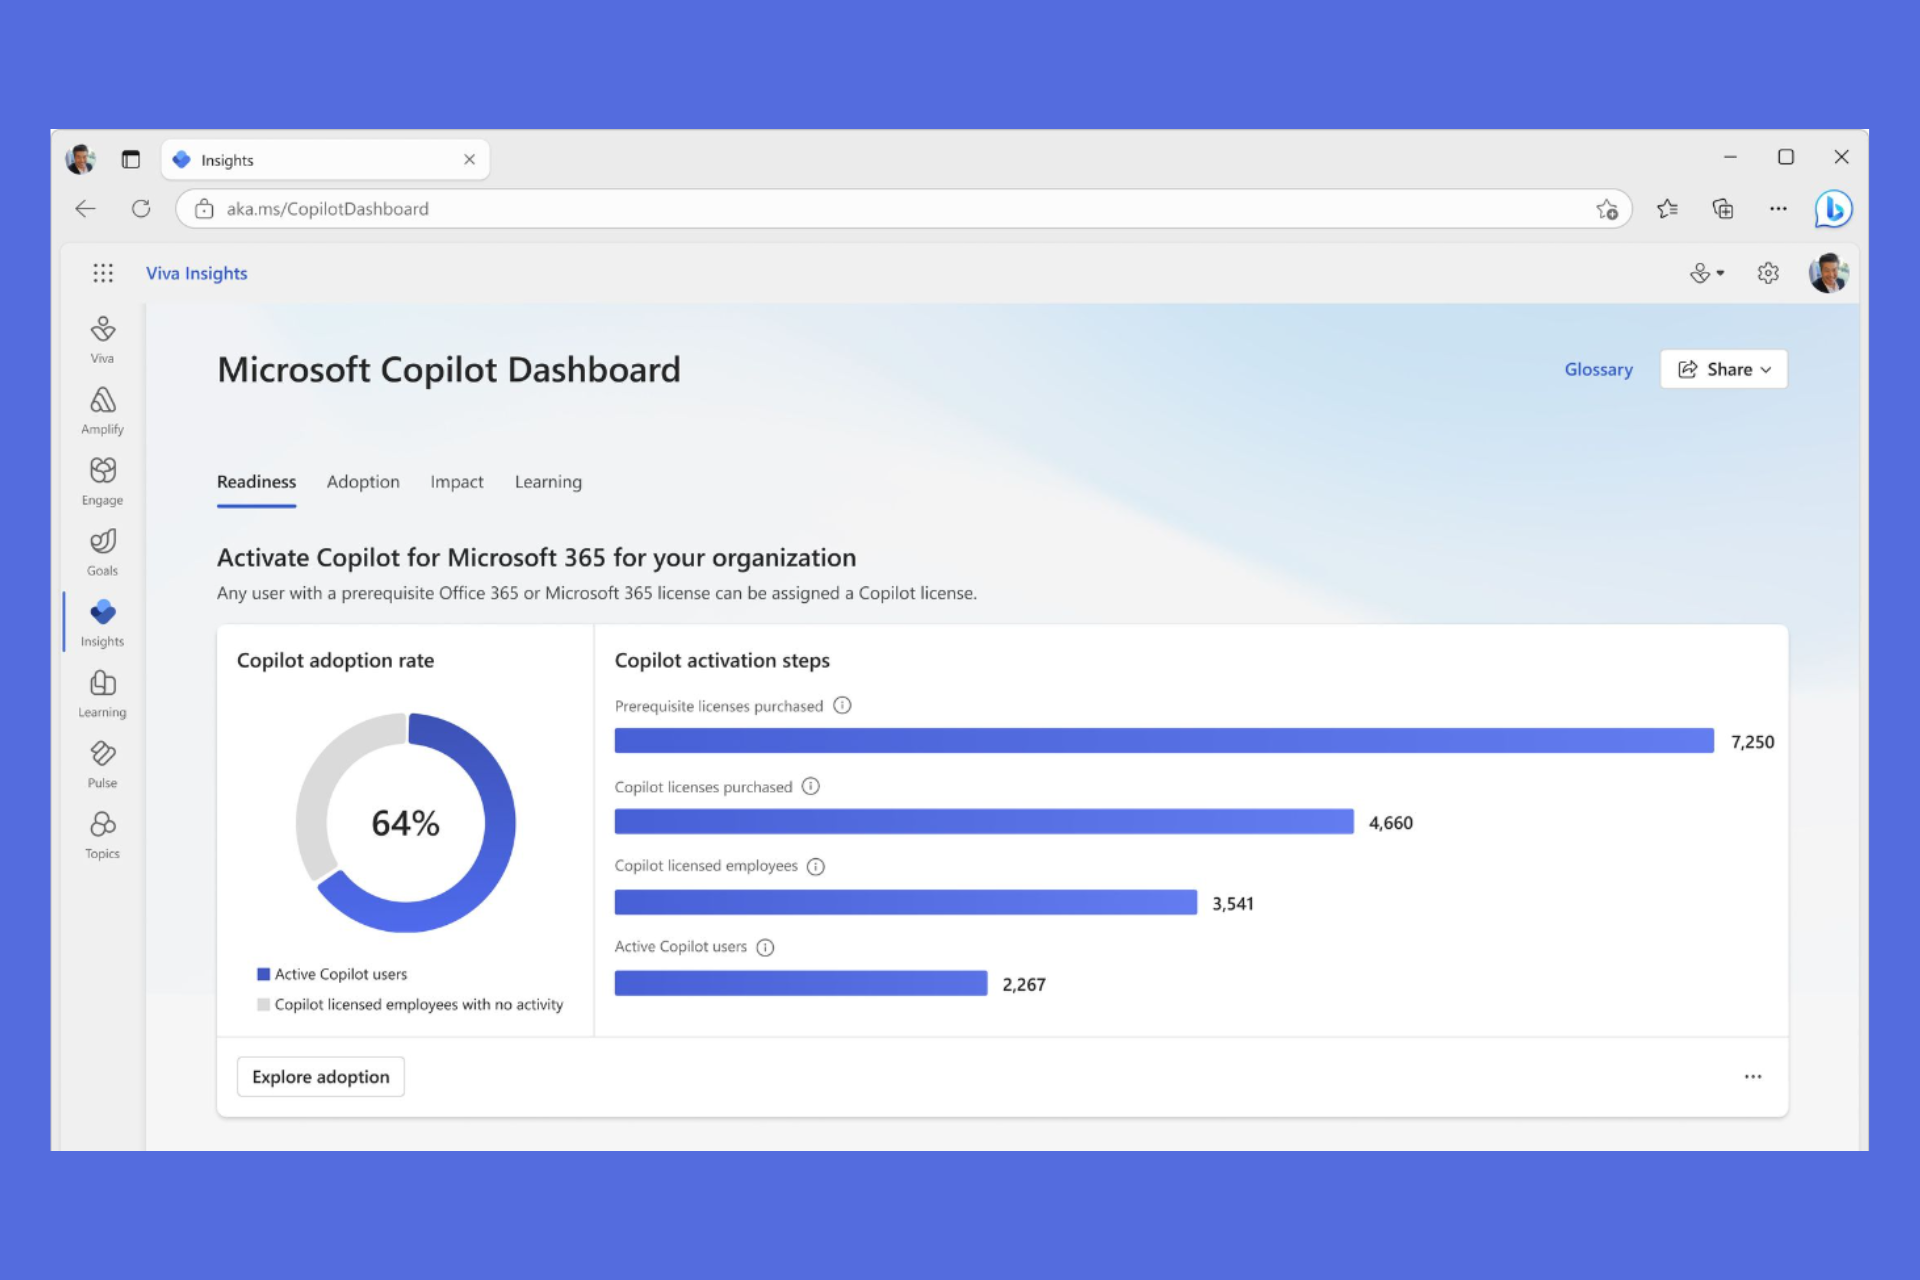 Copilot Dashboard and Academy are available to business users